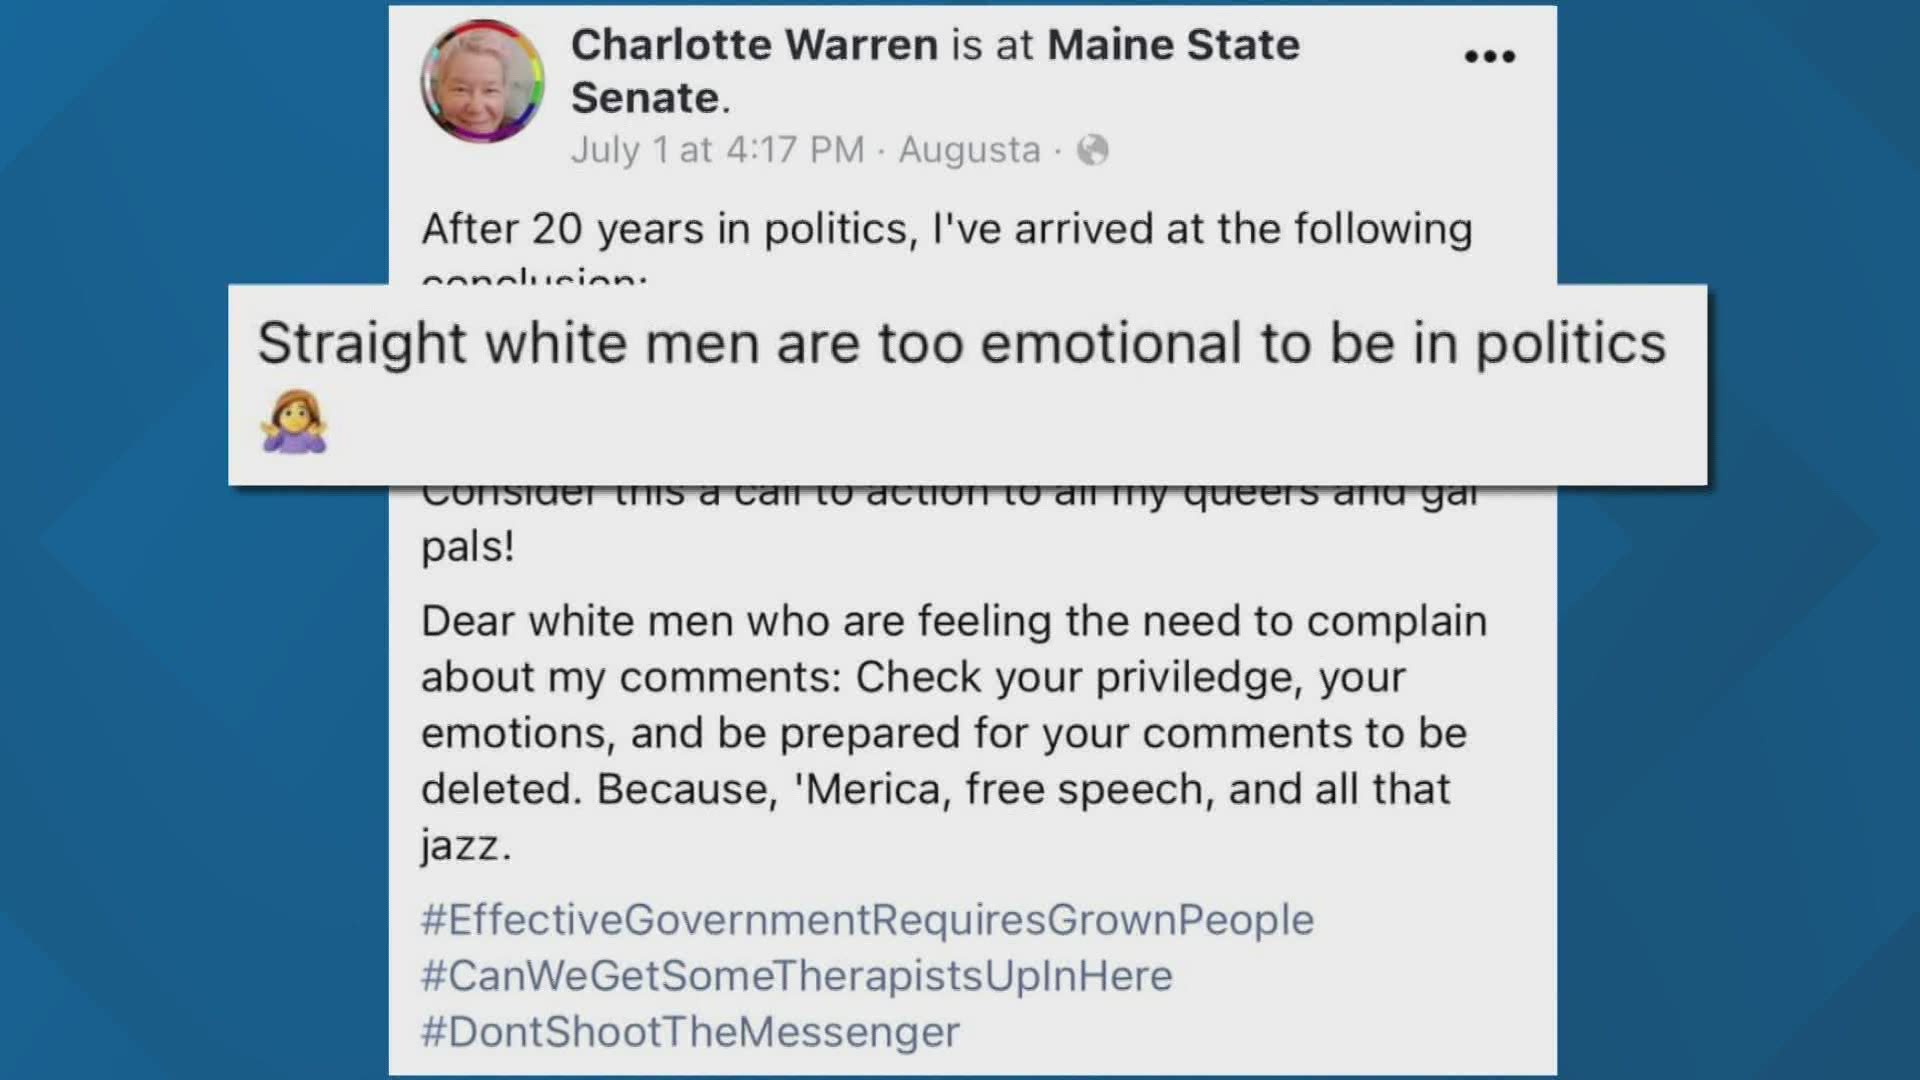 Rep. Charlotte Warren shared a statement with NEWS CENTER Maine saying the post was "tongue-in-cheek and intended to poke fun."